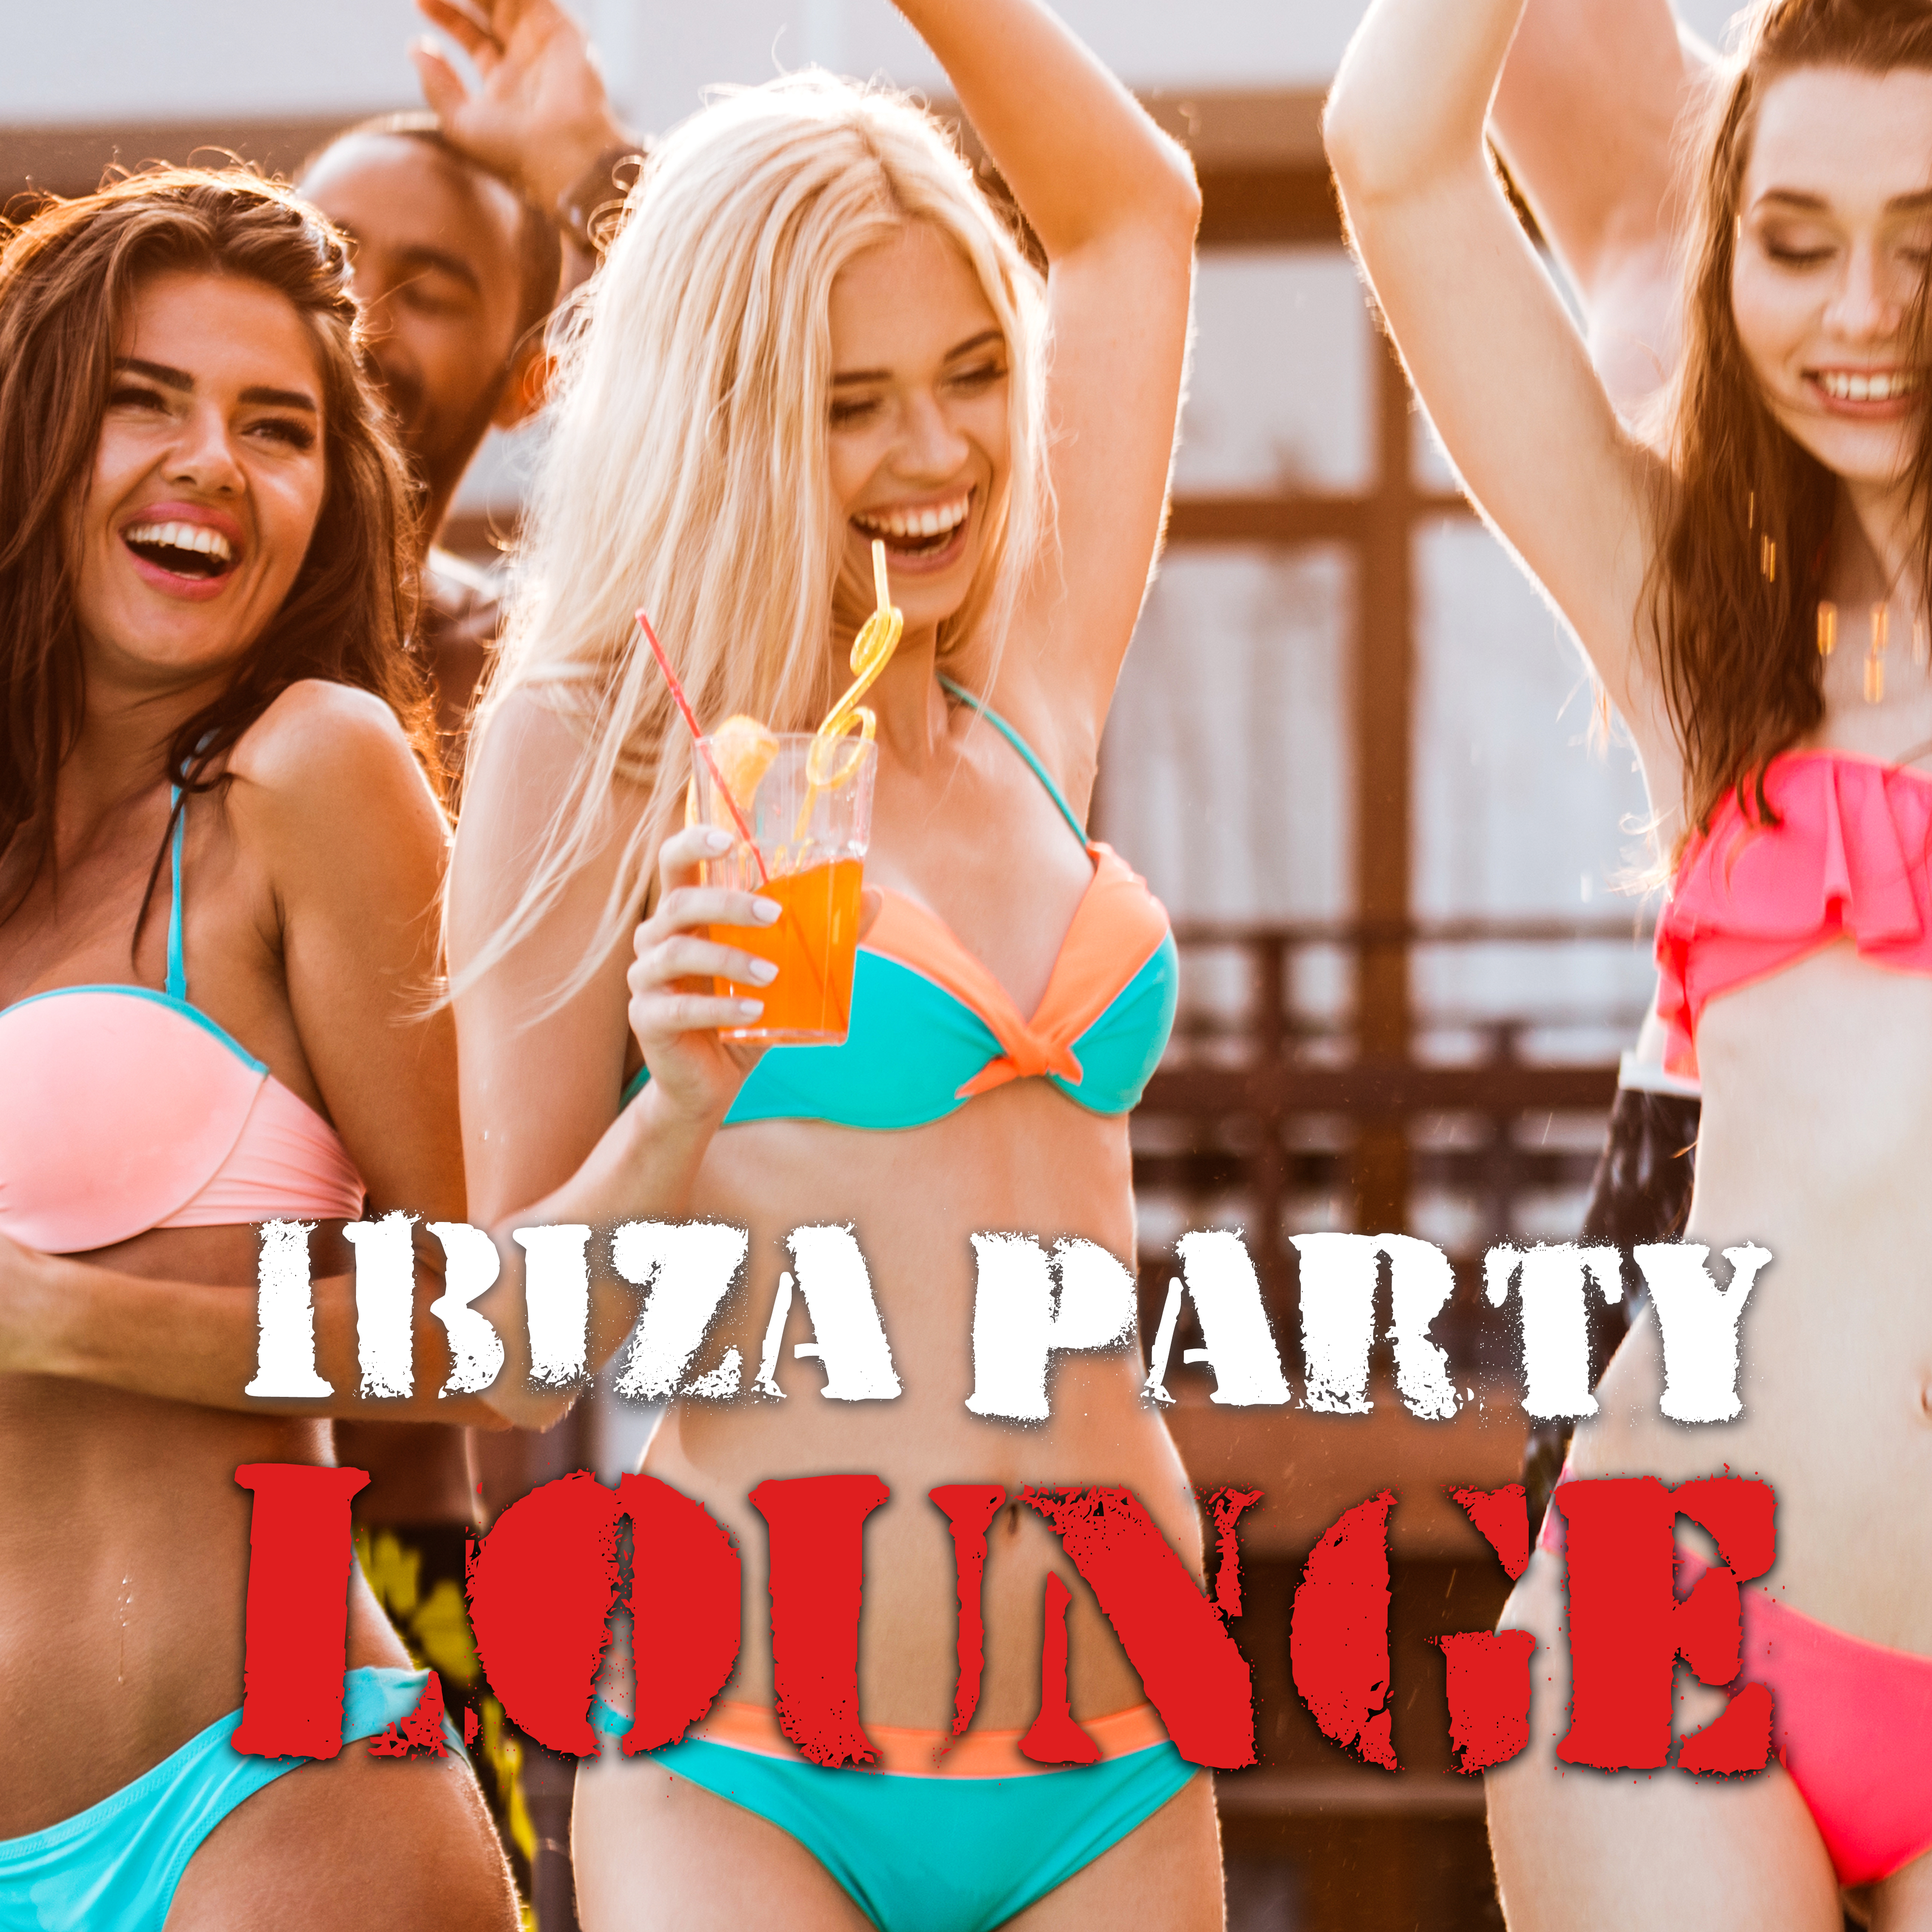 Ibiza Party Lounge – Chillout Music, Party Music, Dancefloor, Relax By the Pool, Drinkbar Music